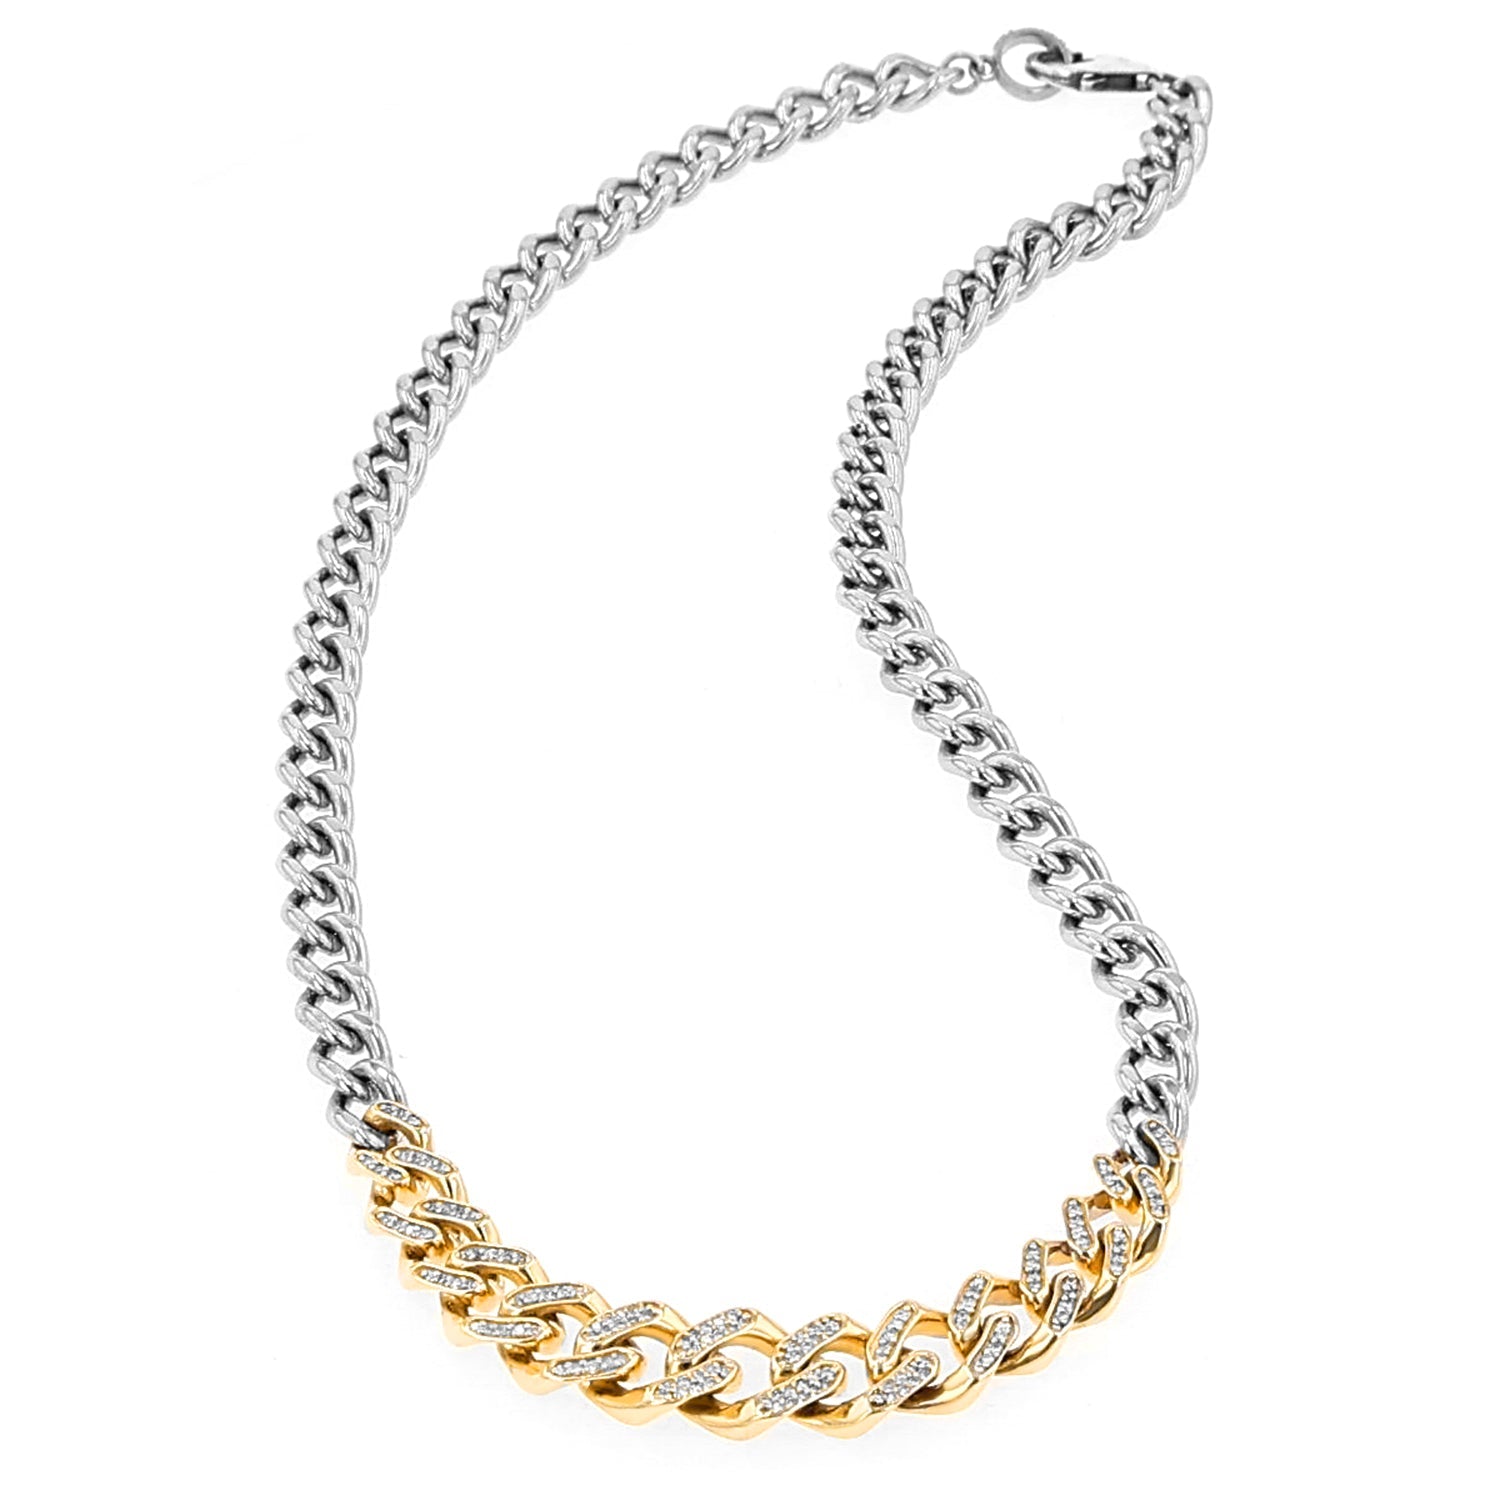 14K Pave Diamond & Silver Tapered Links Curb Chain Necklace - 18"  NMM00012 - TBird